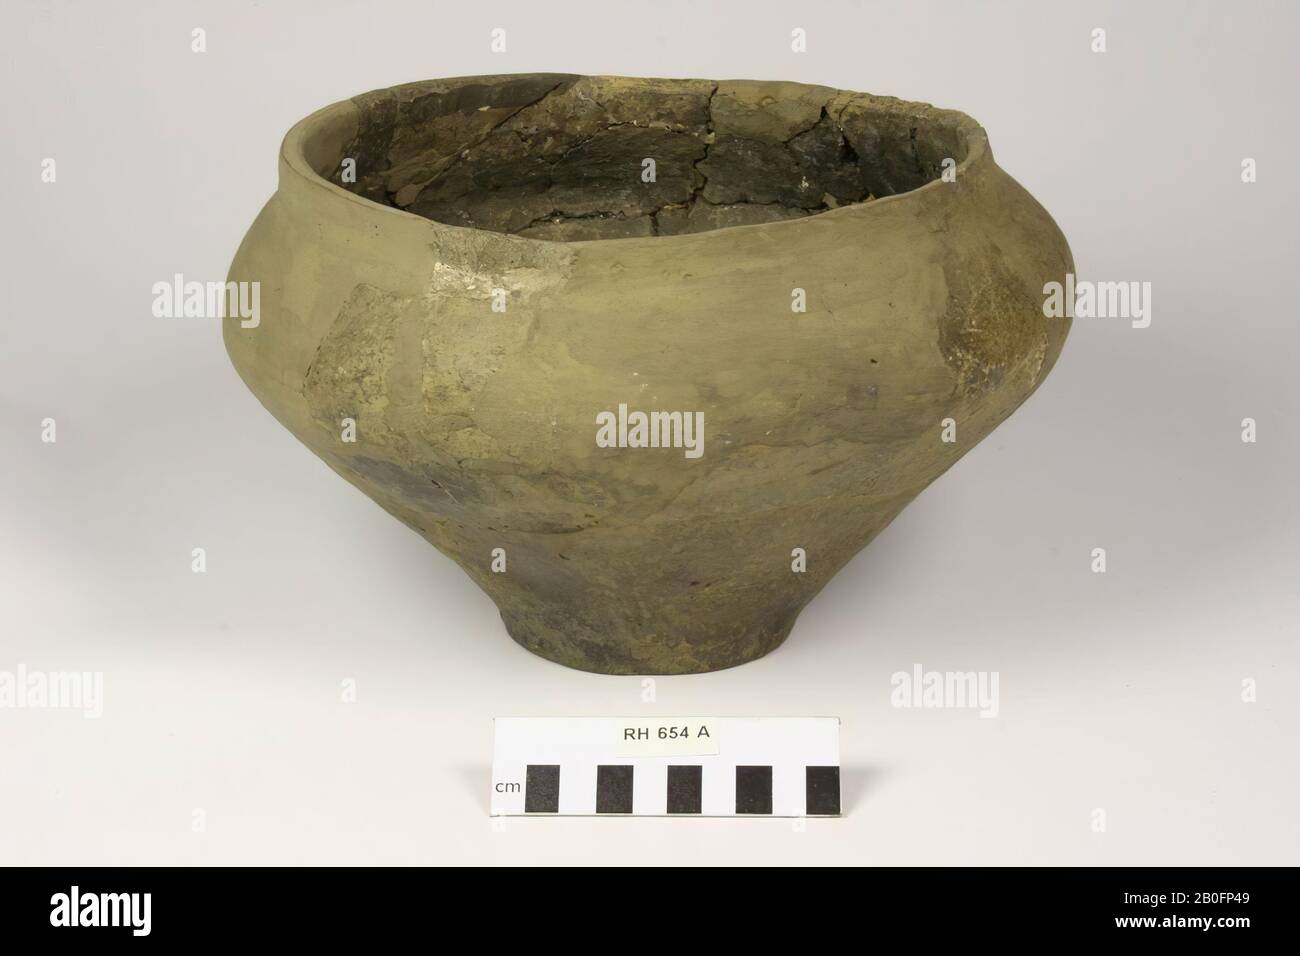 Wide-pitched cooking pot made of rough-walled earthenware. Glue and additions., Pot, earthenware (rough wall), h: 16.4 cm, diam: 27 cm, vmeb, Netherlands, Utrecht, Rhenen, Rhenen, grave 654 Stock Photo